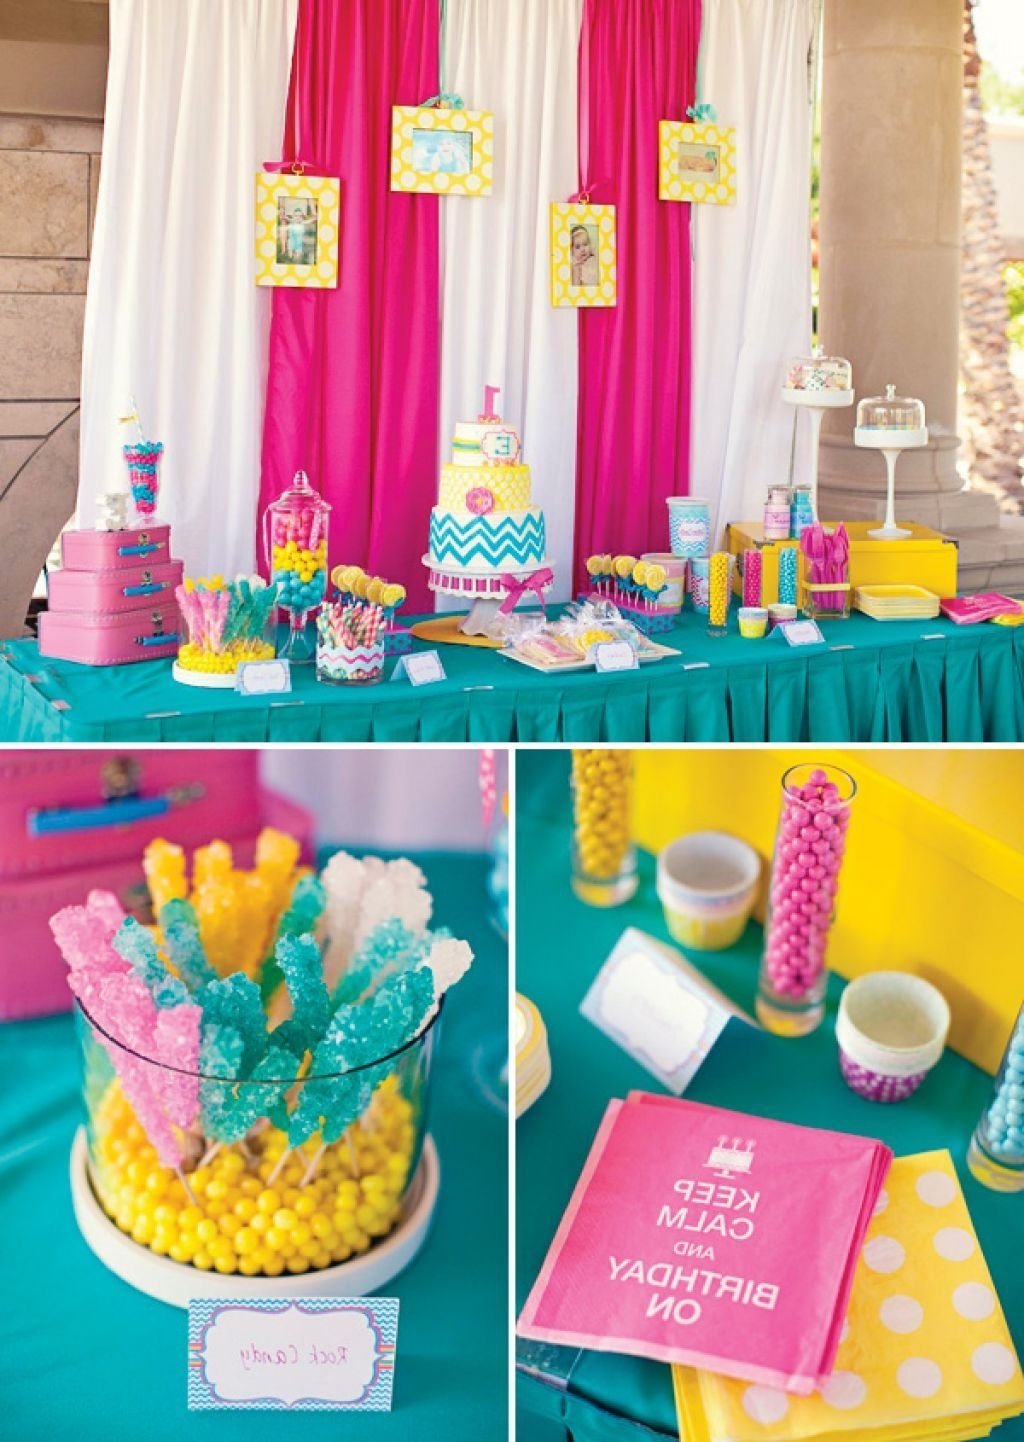 10 Famous 3 Year Old Girl Birthday Party Ideas outdoor party decorations google search madeline pinterest 3 2022